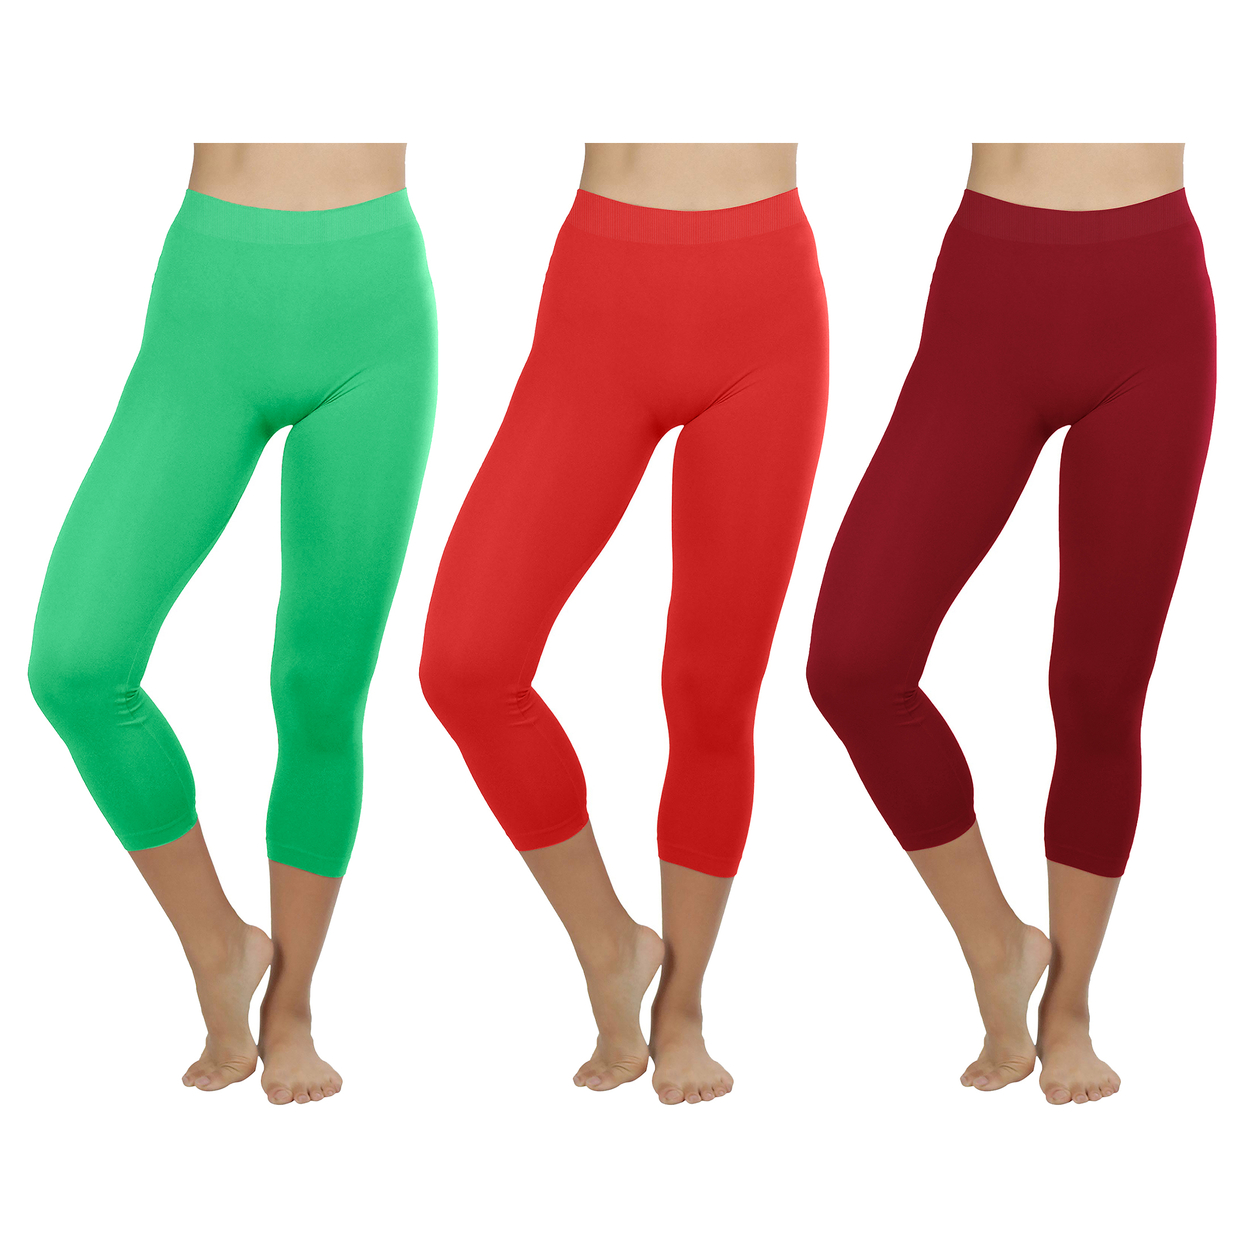 2-Pack: Women's Ultra-Soft High Waisted Smooth Stretch Active Yoga Capri Leggings - Burgundy & Red, X-small